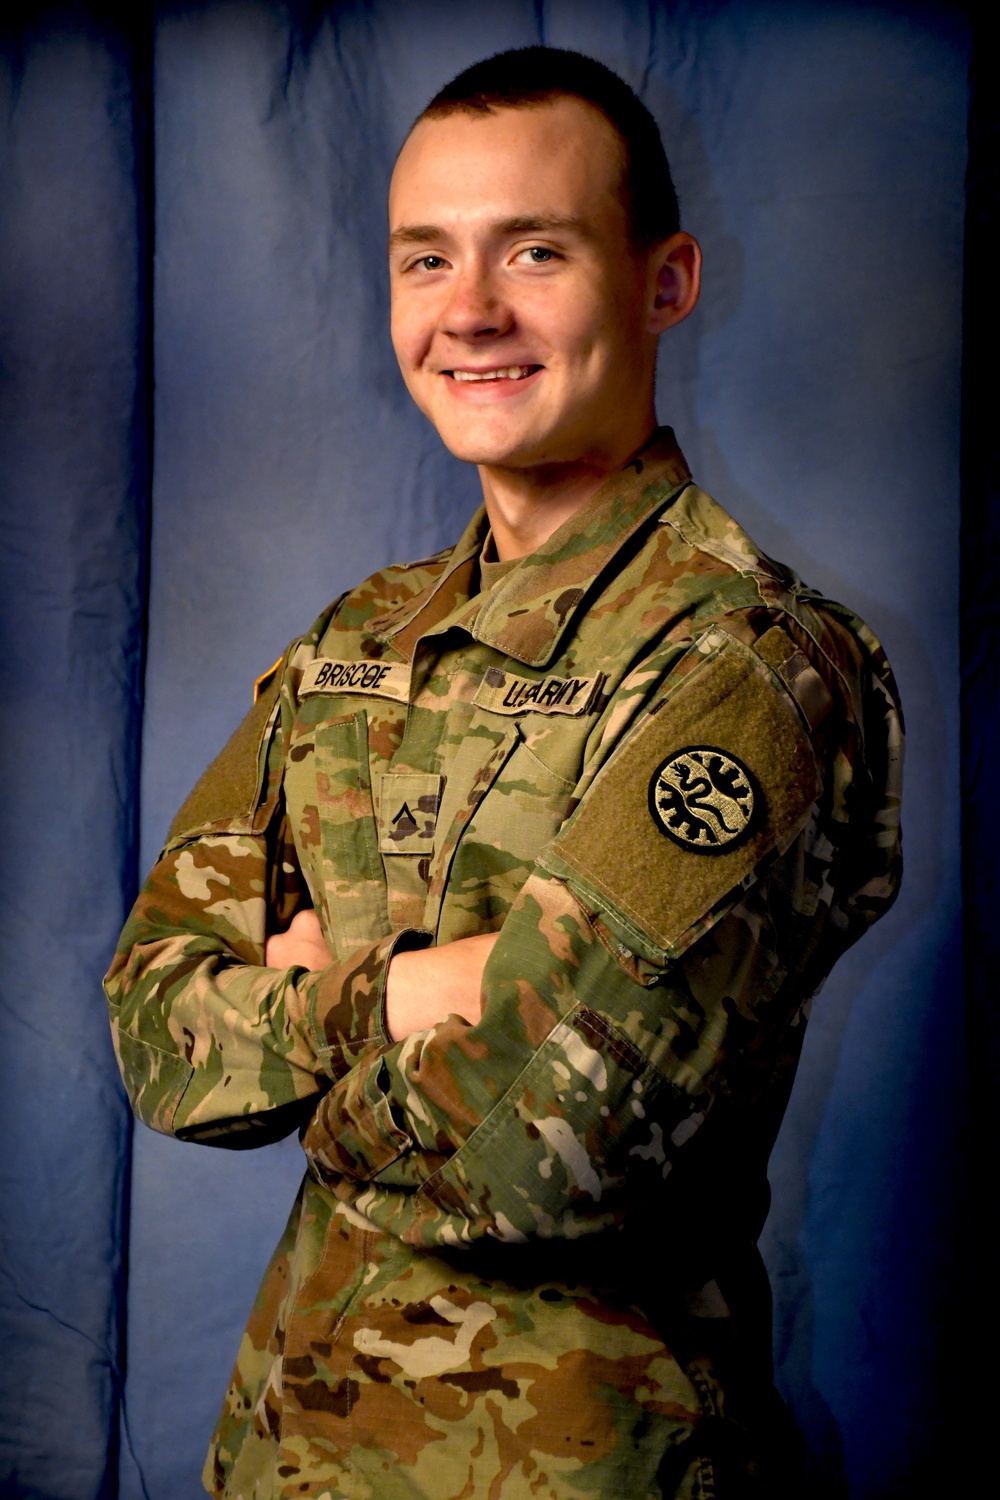 While still in high school, Idaho Army National Guard Soldier serves community, builds future